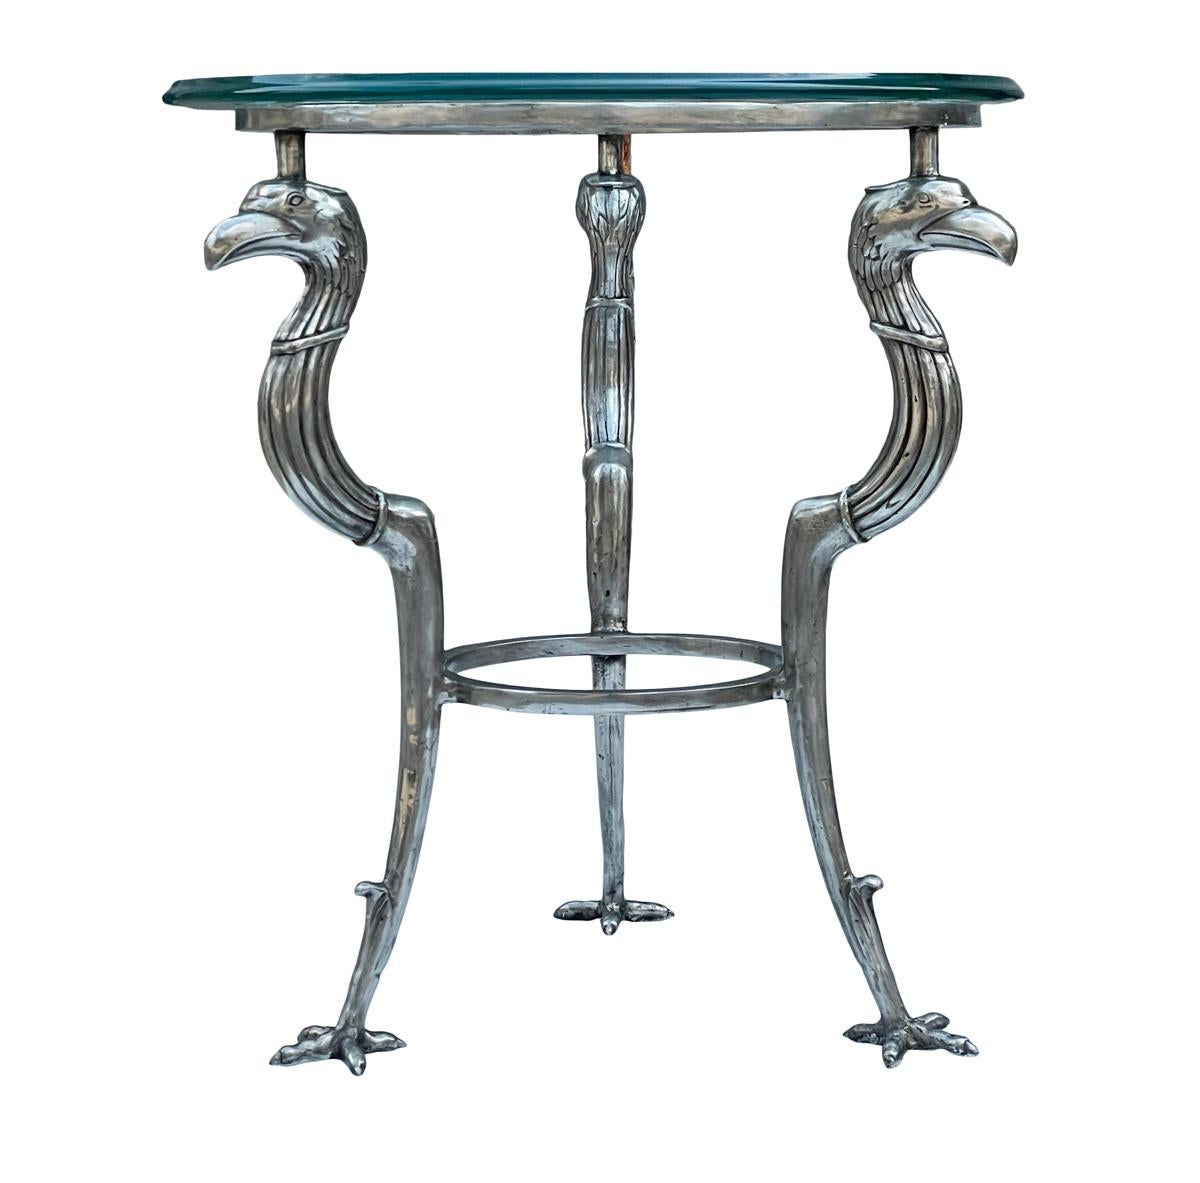 Late 20th Century Matching Pair of Hollywood Regency Glass & Steel End Tables by Maitland Smith For Sale